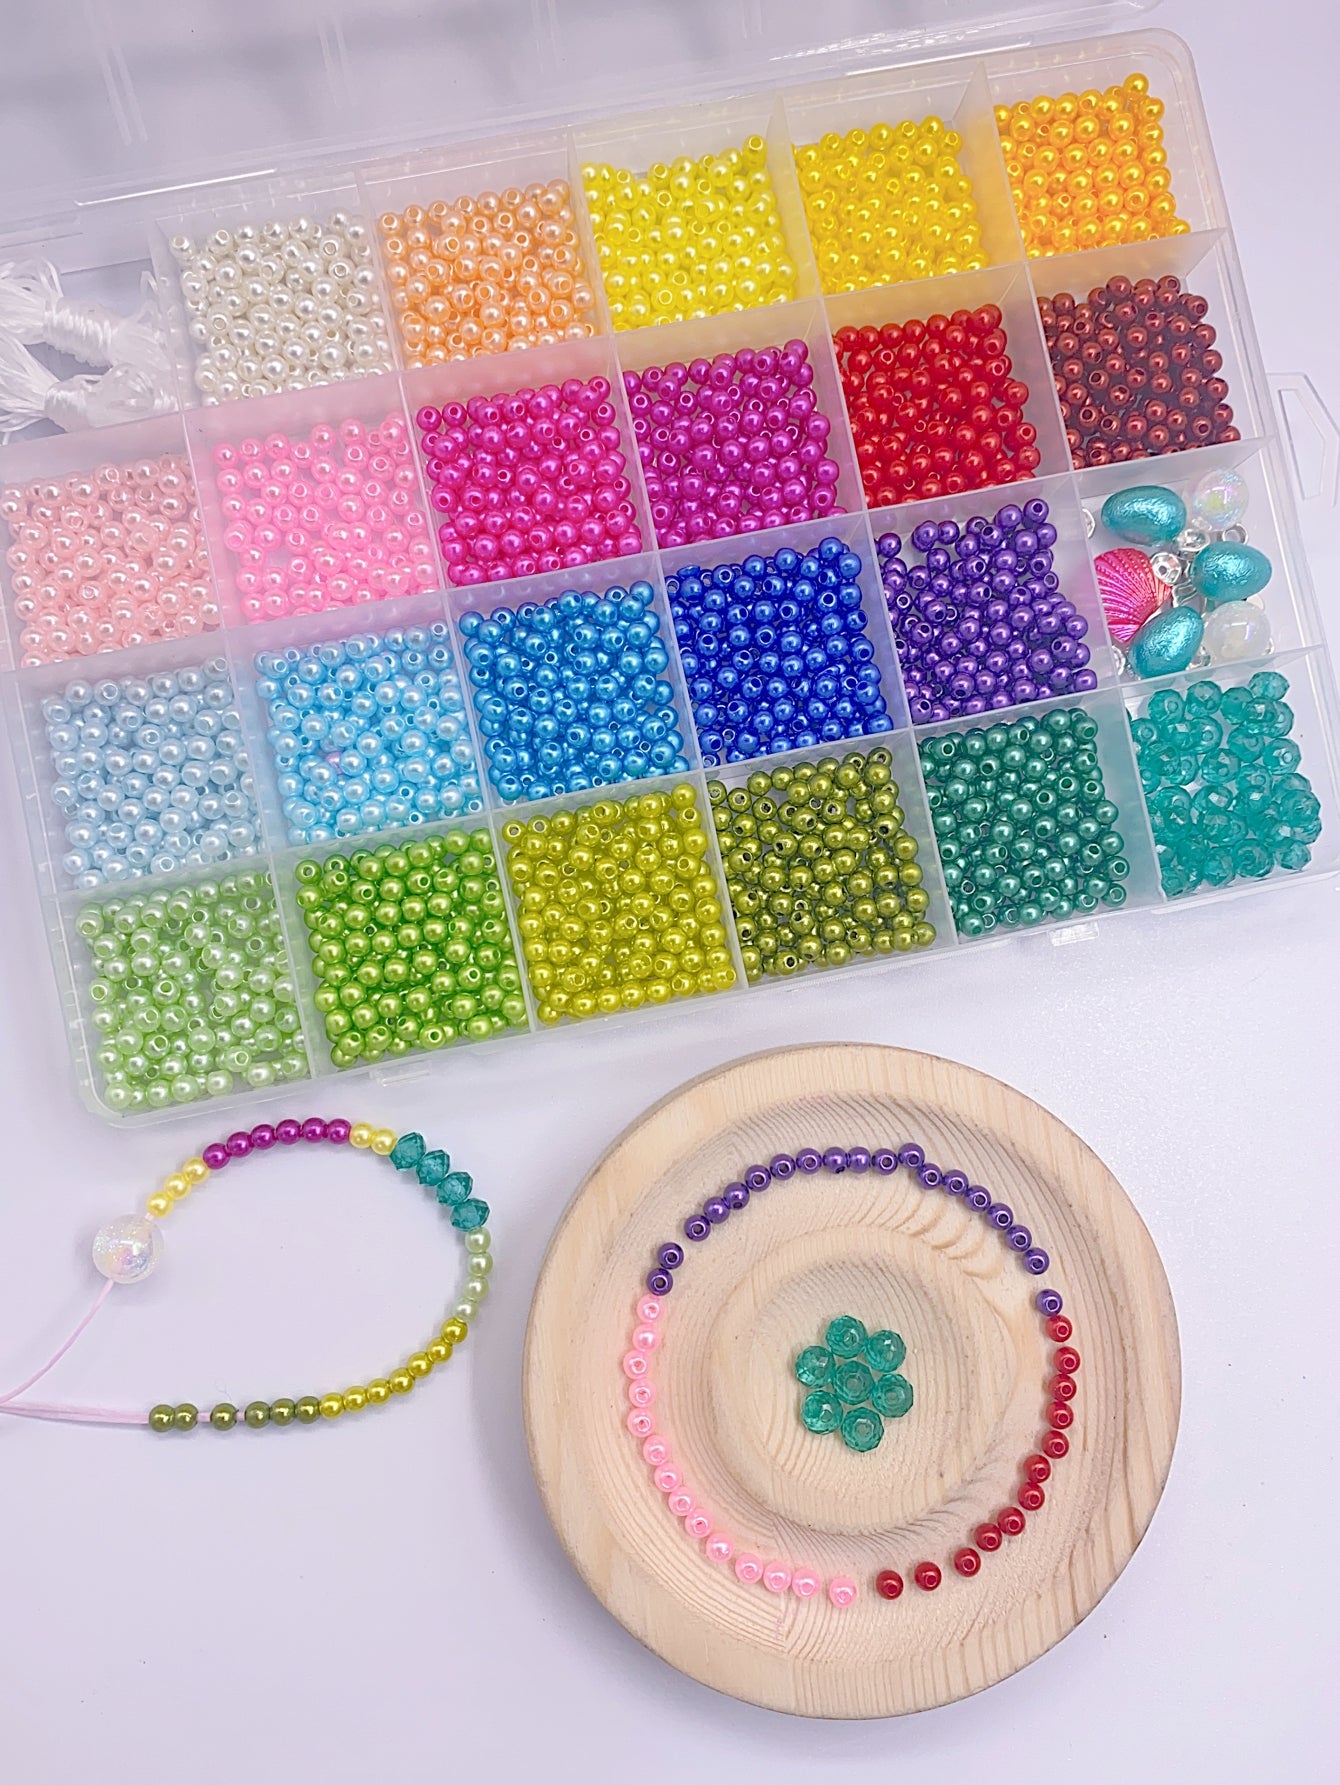 New self-made diy24 palace abs seven color straight hole imitation pearl mix children's puzzle bead material 1 box